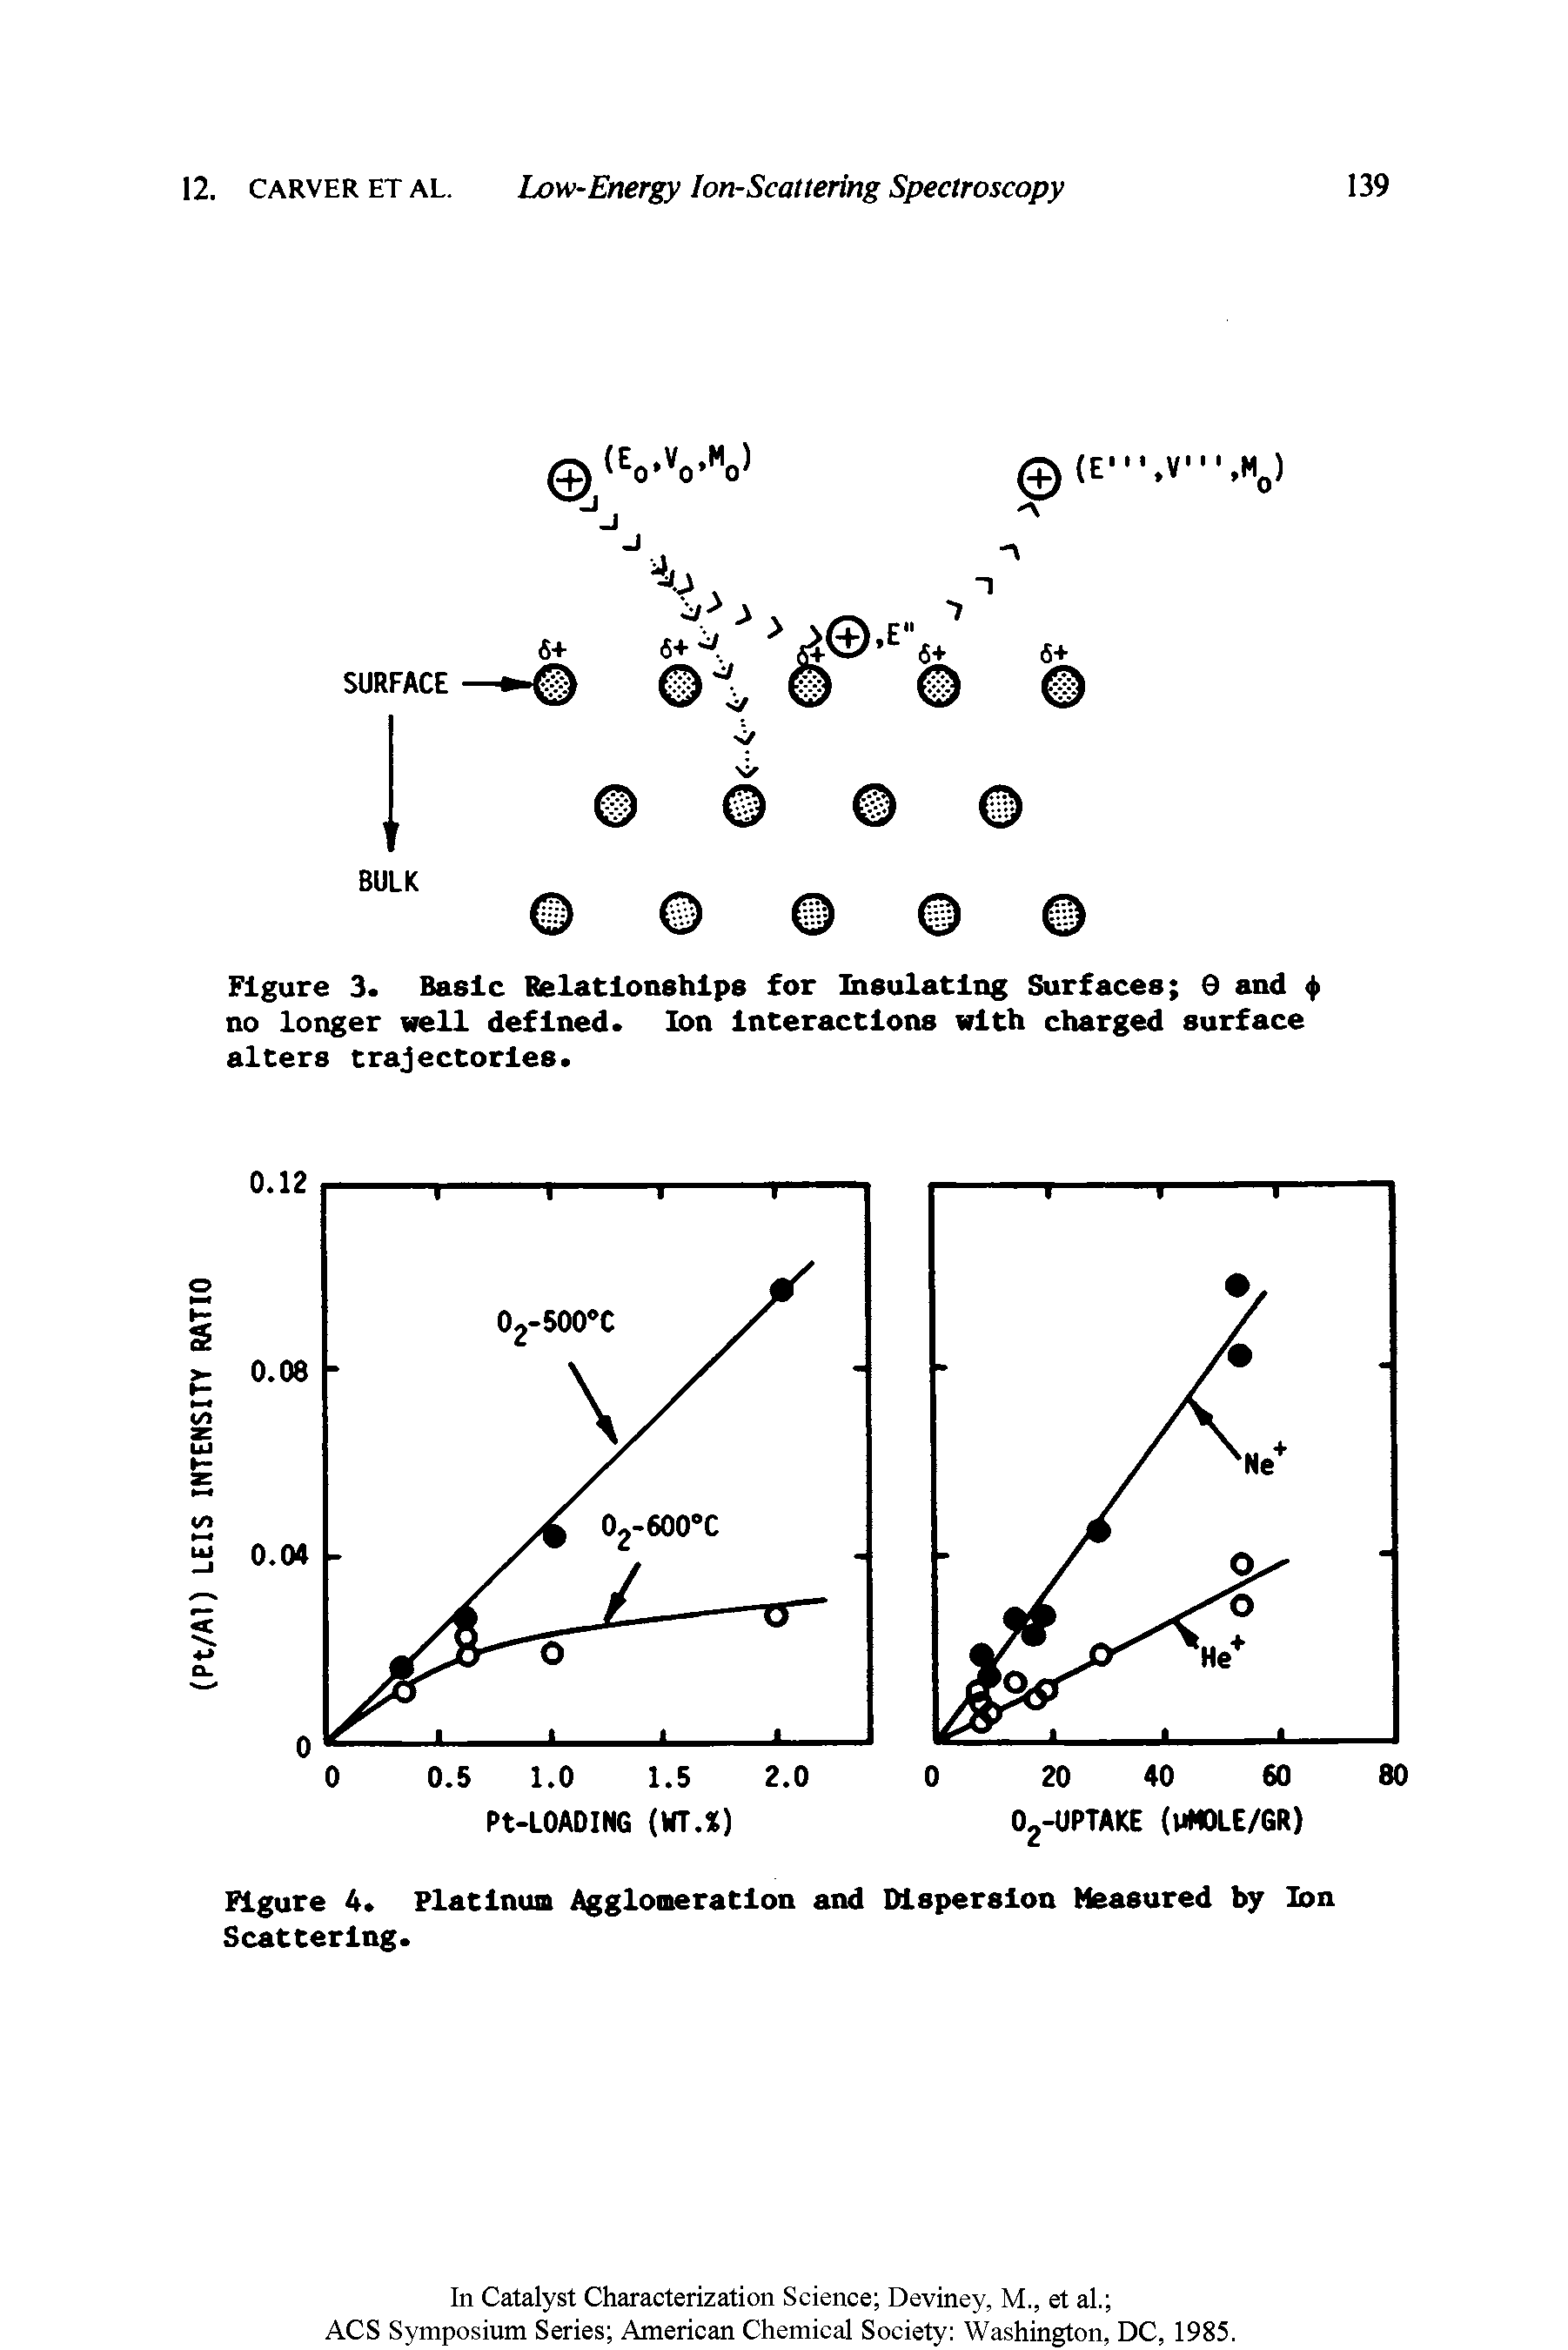 Figure 4. Platinum Agglomeration and Dispersion Measured by Ion Scattering.